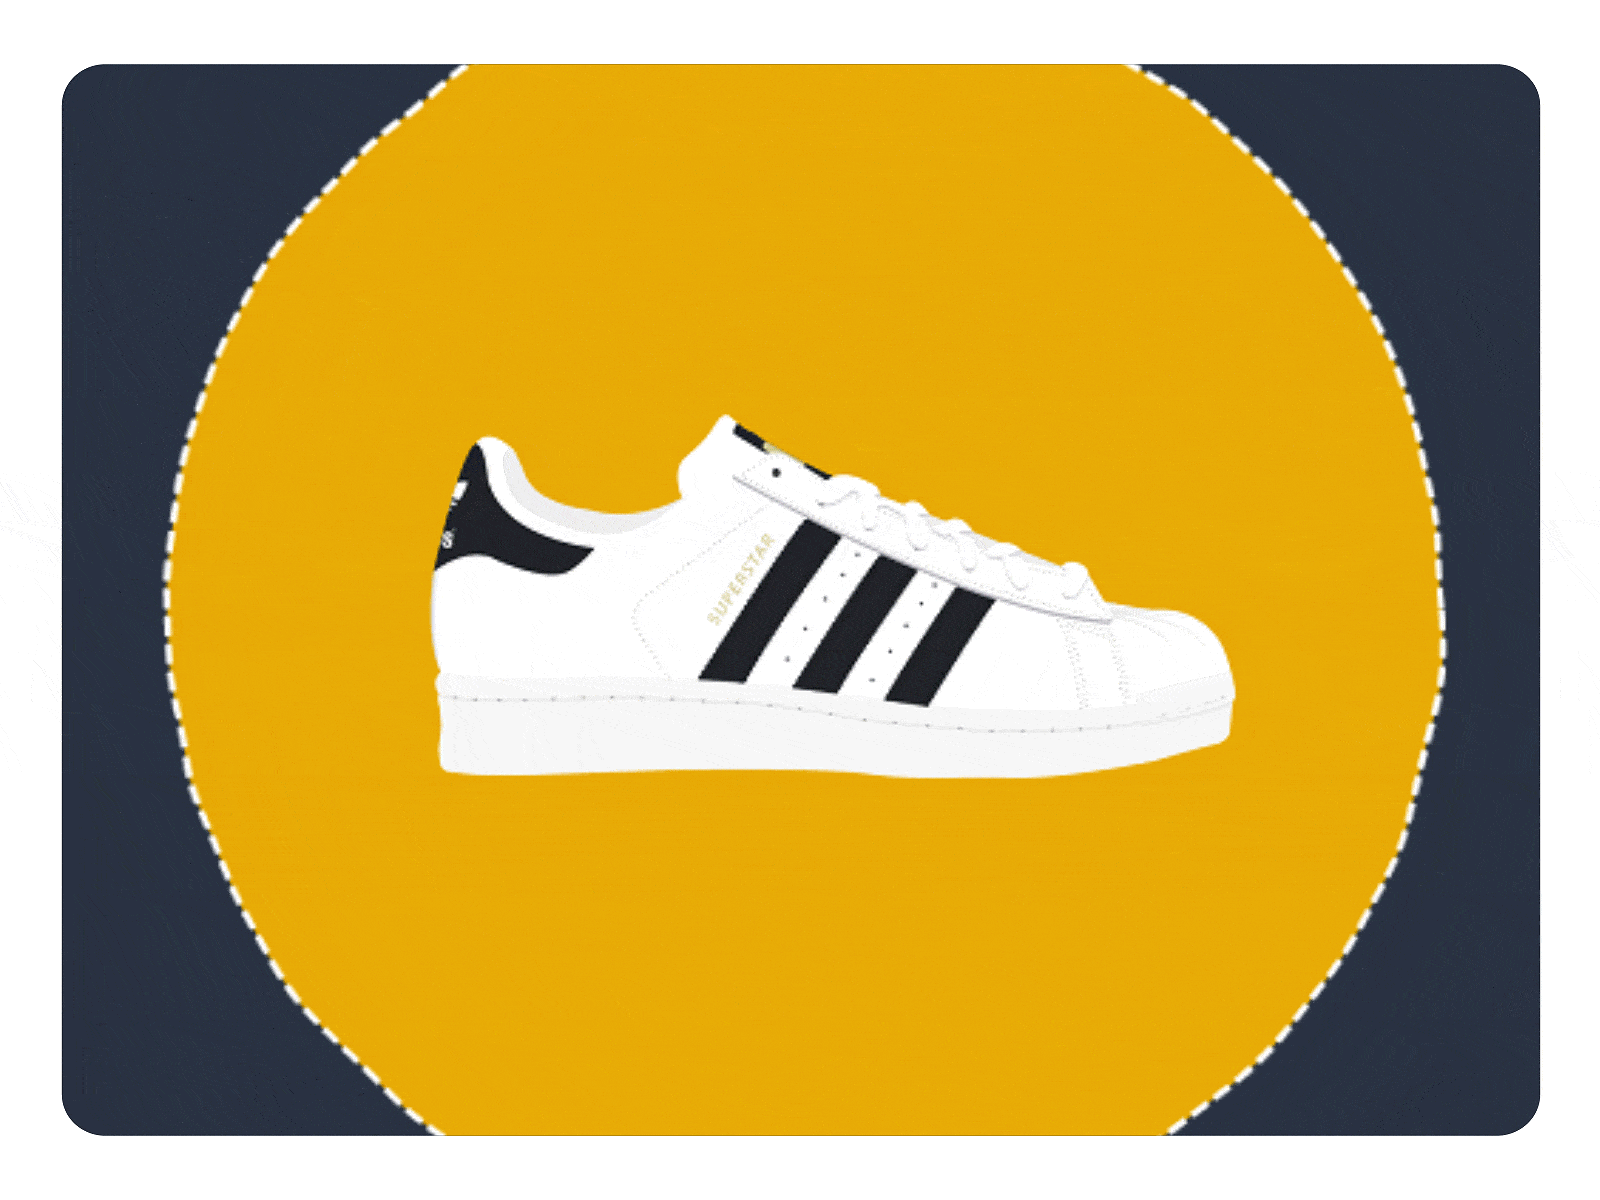 Sneakers Morphing 2d animation 2d character adidas after effects animation illustration illustration motion animation motion sneaker